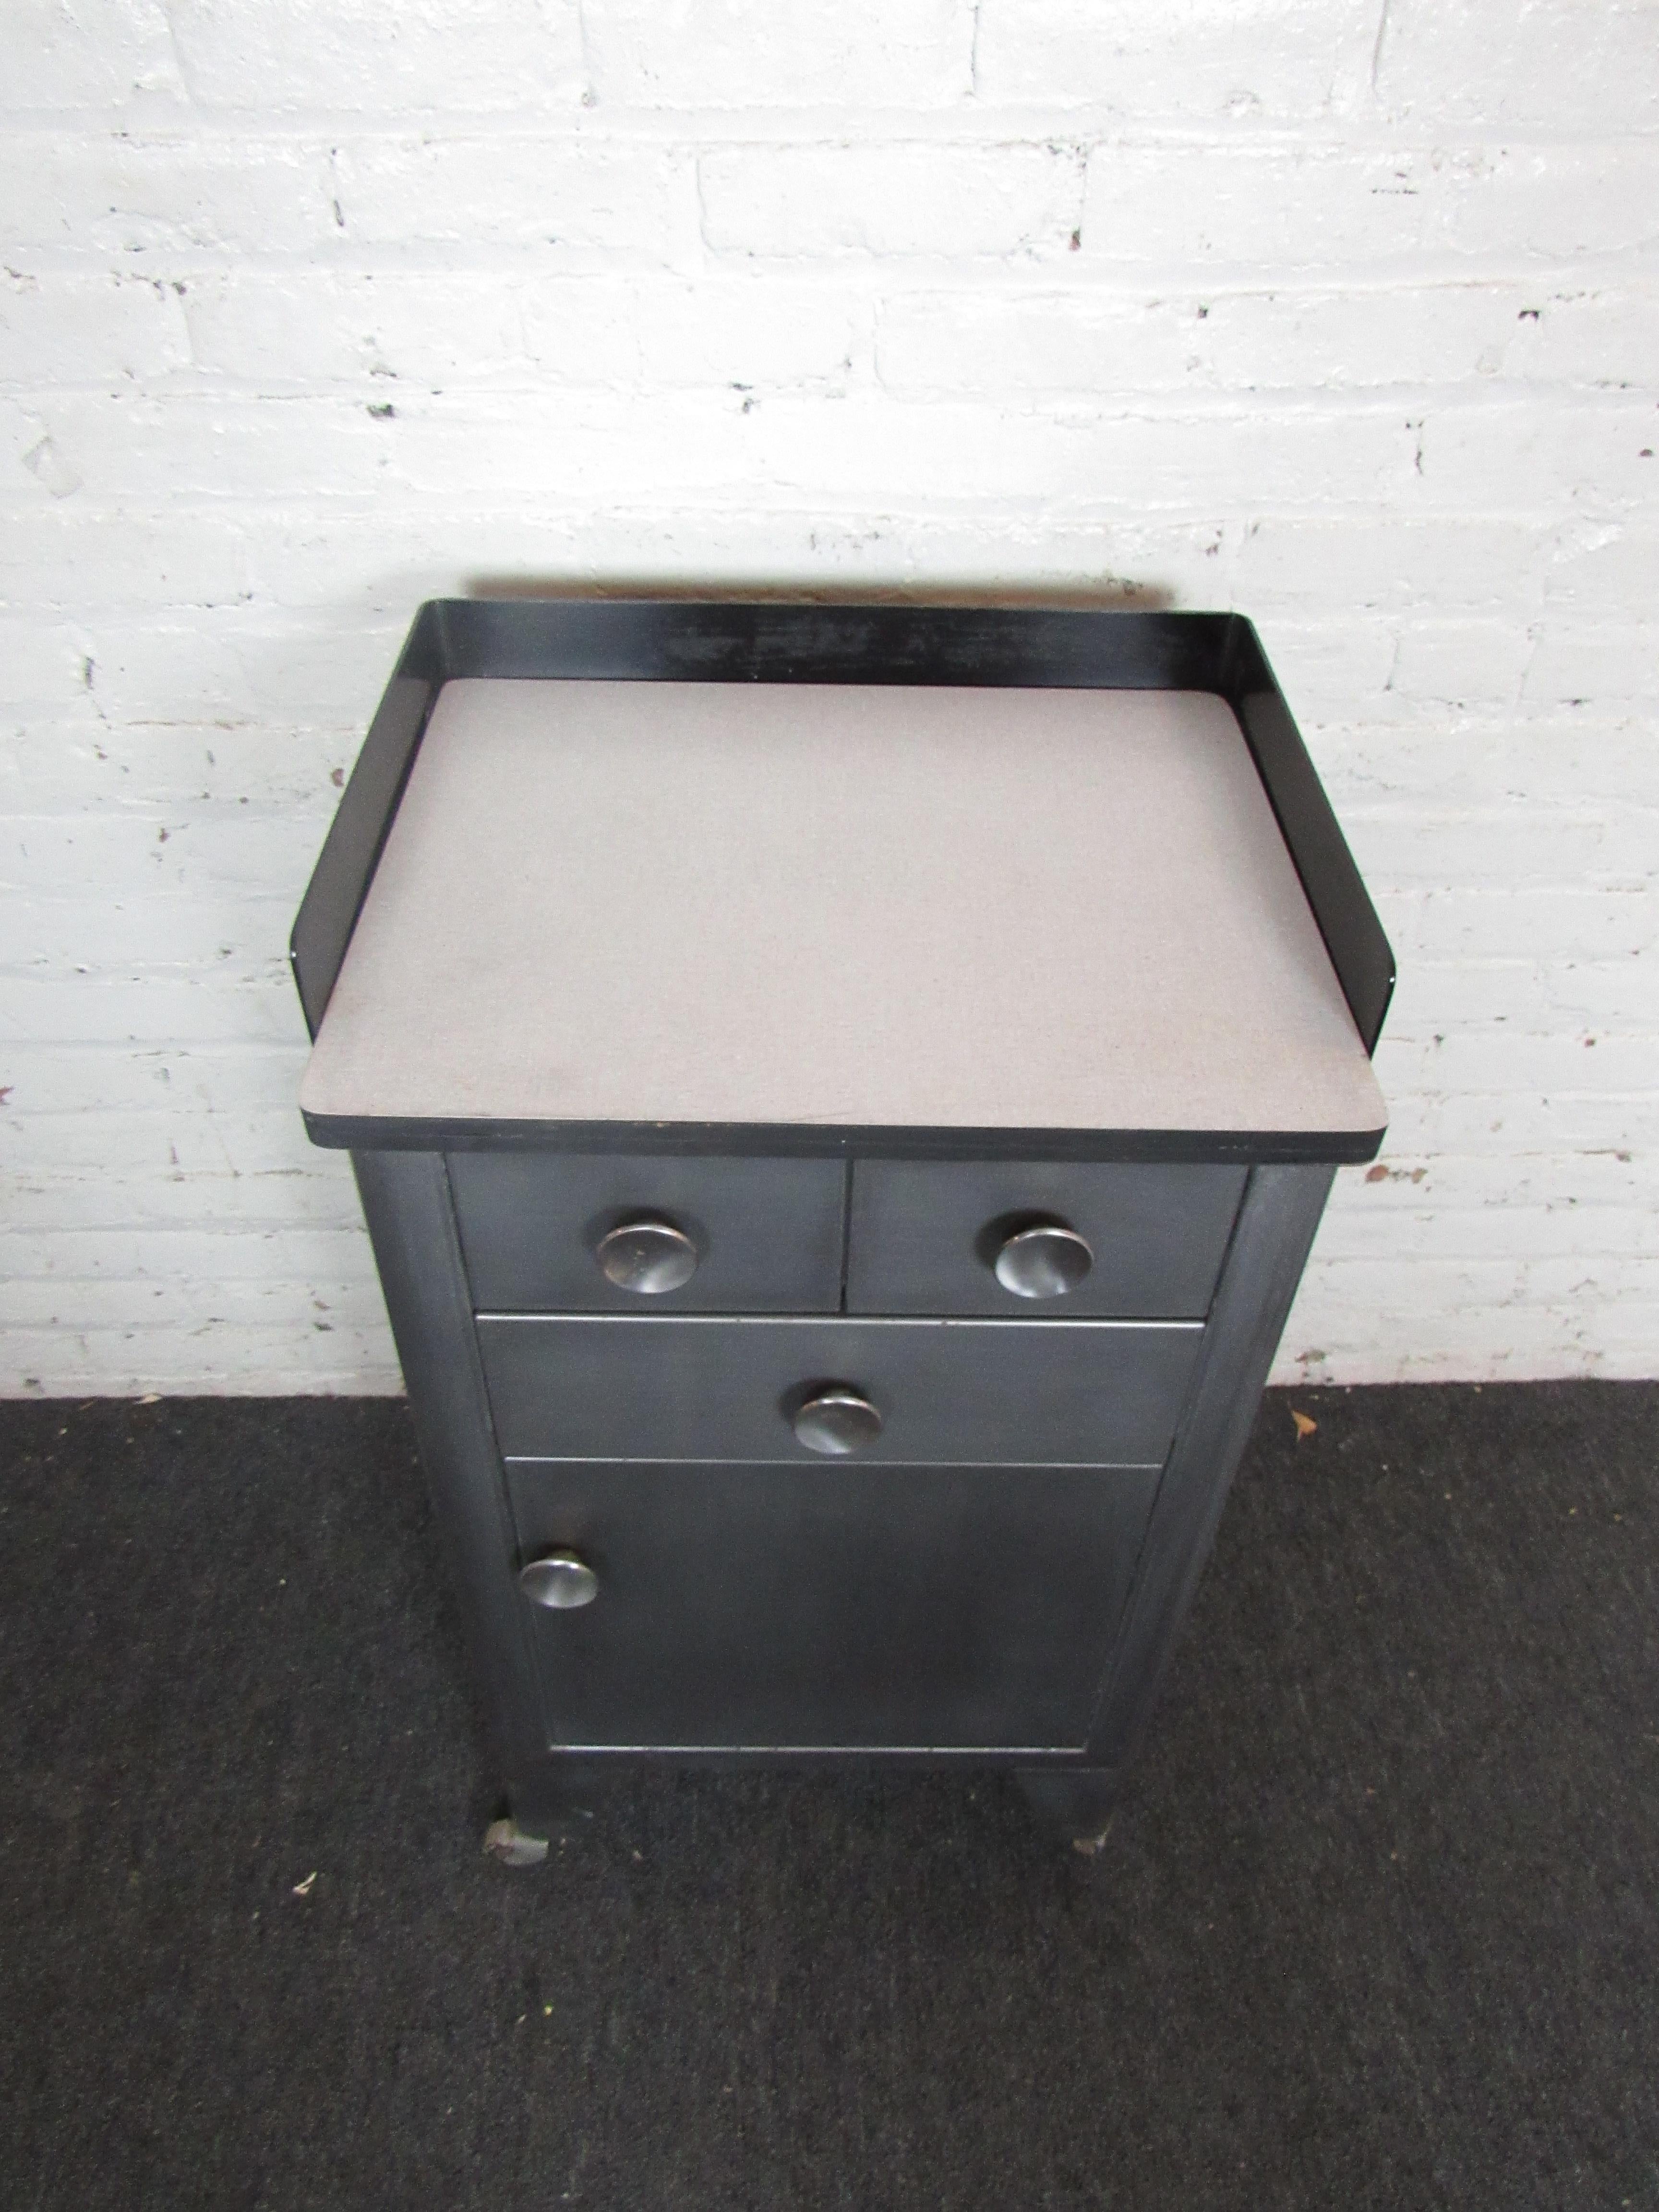 A sturdy industrial cabinet with three drawers and a door offering spacious compartments, this compact piece is built to last. Rolling wheels make this cabinet great for a garage, shop, or studio. Please confirm item location with seller (NY/NJ).